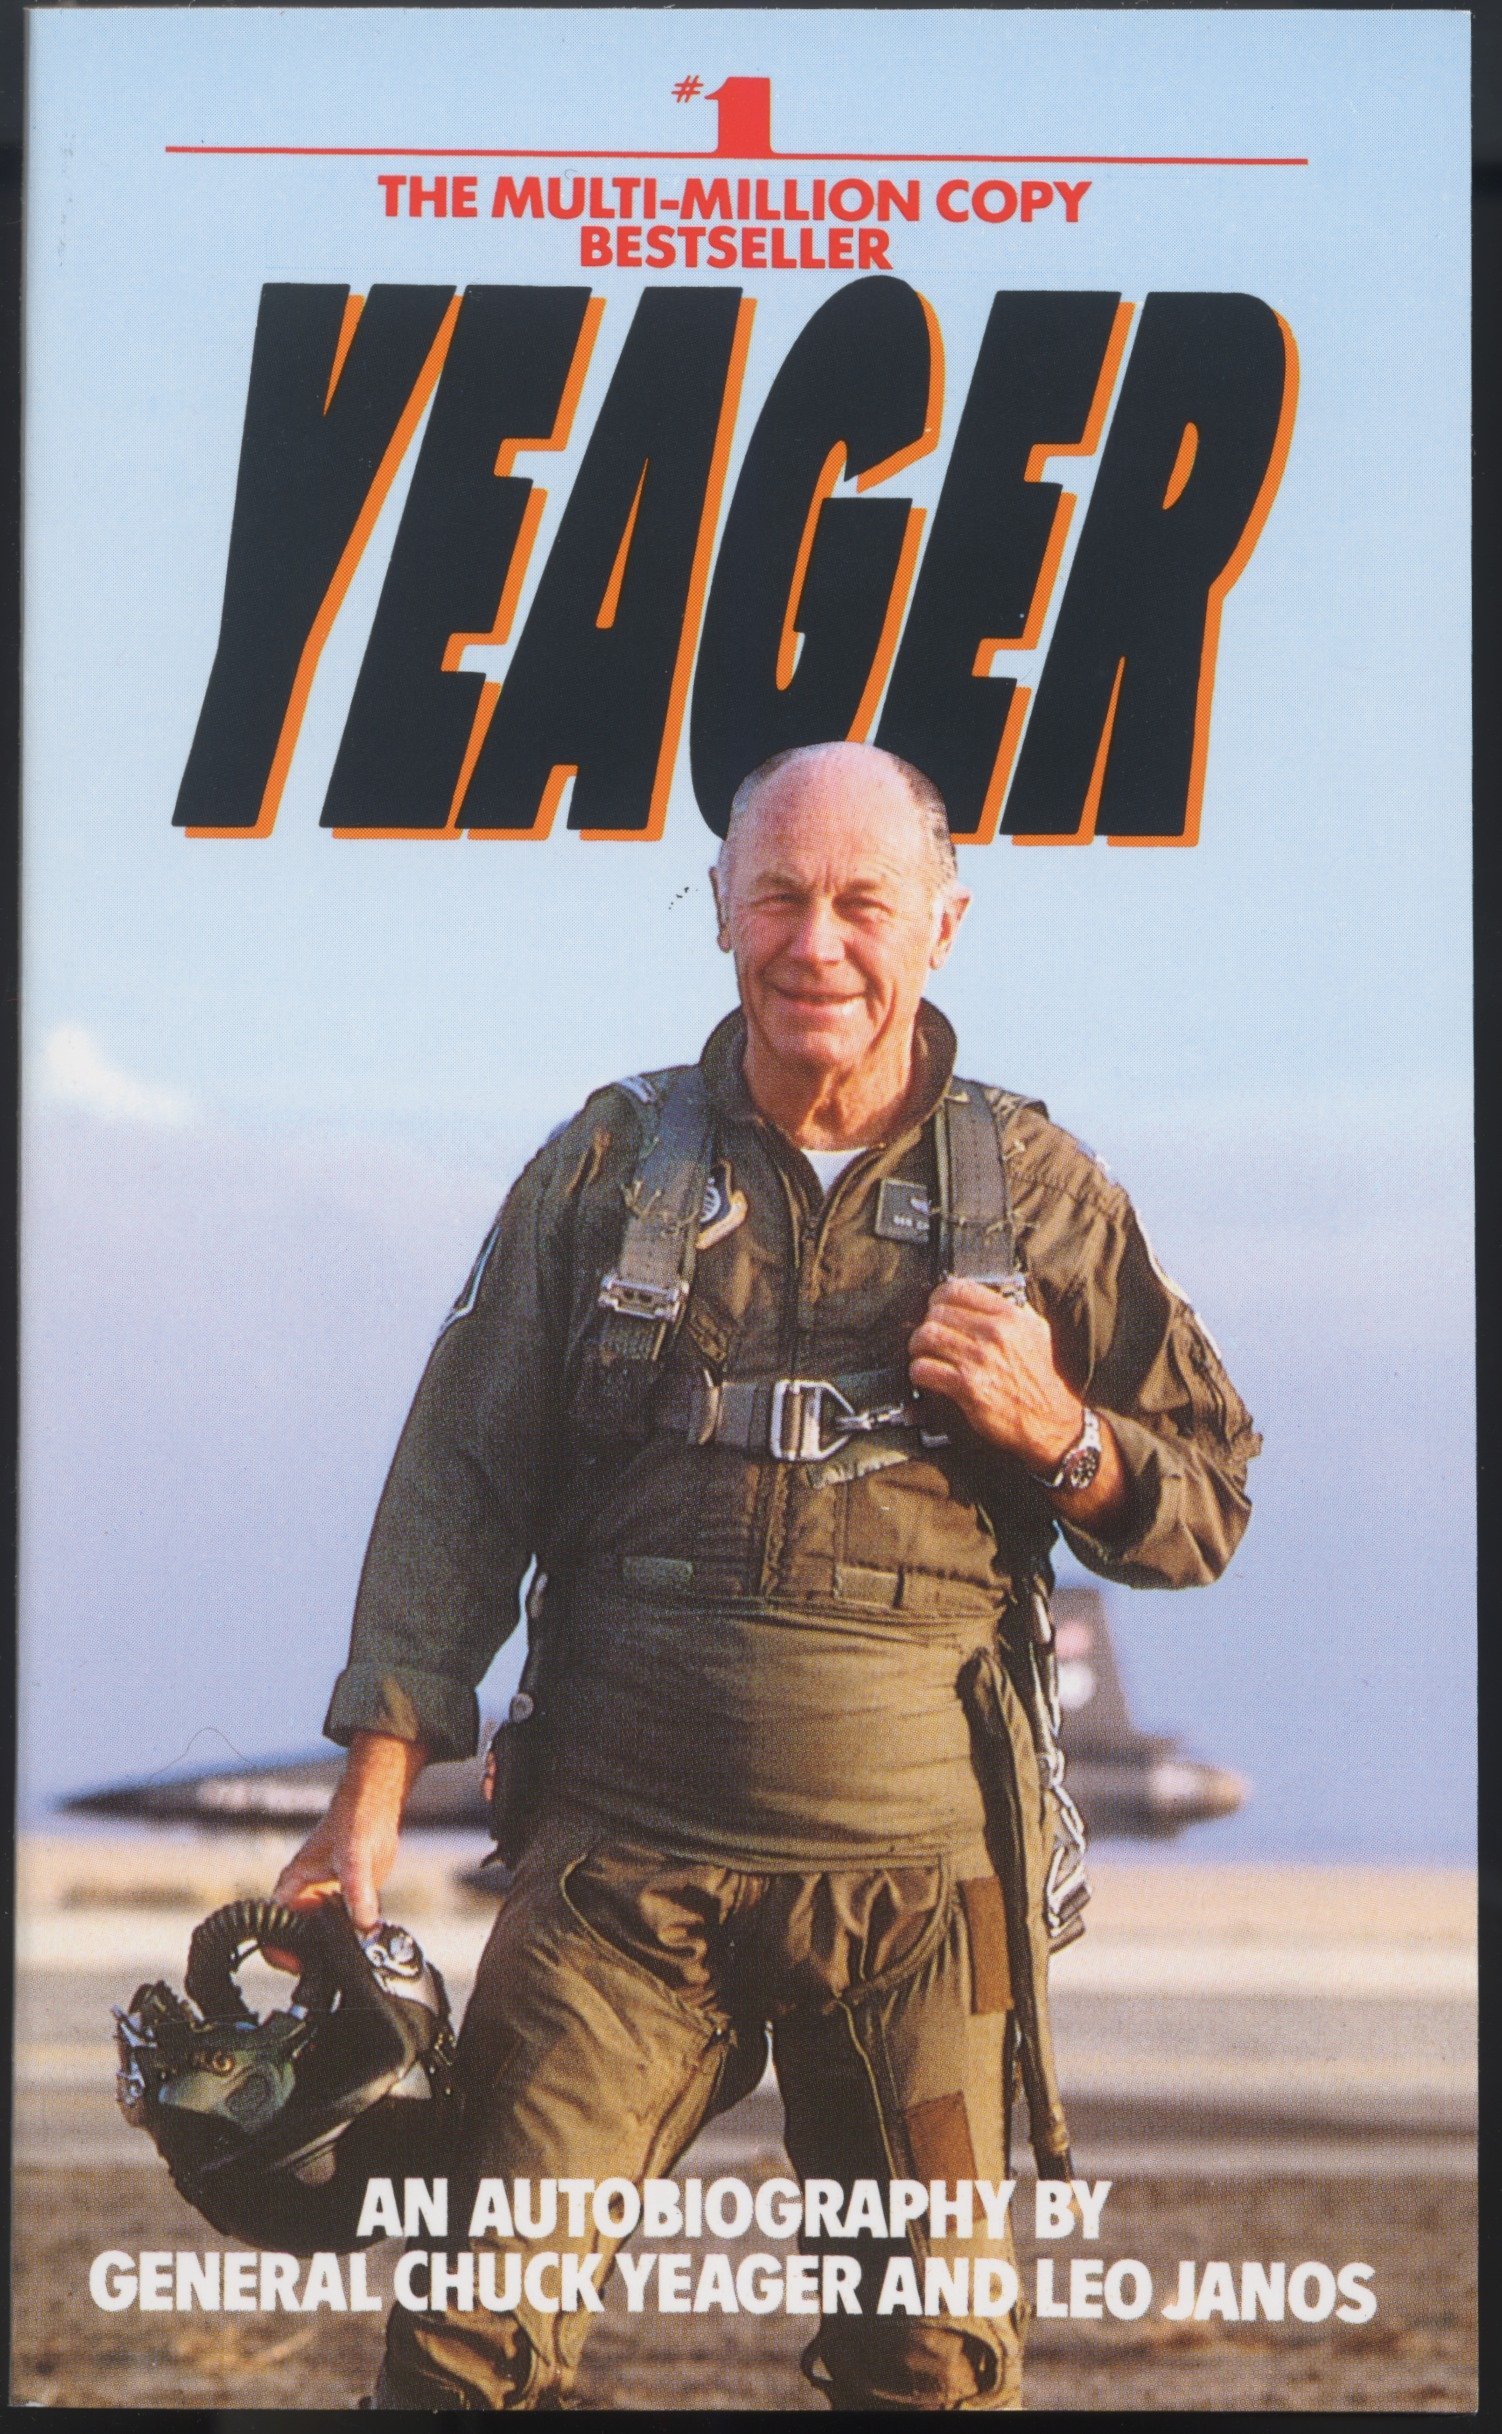 Yeager, an autobiography